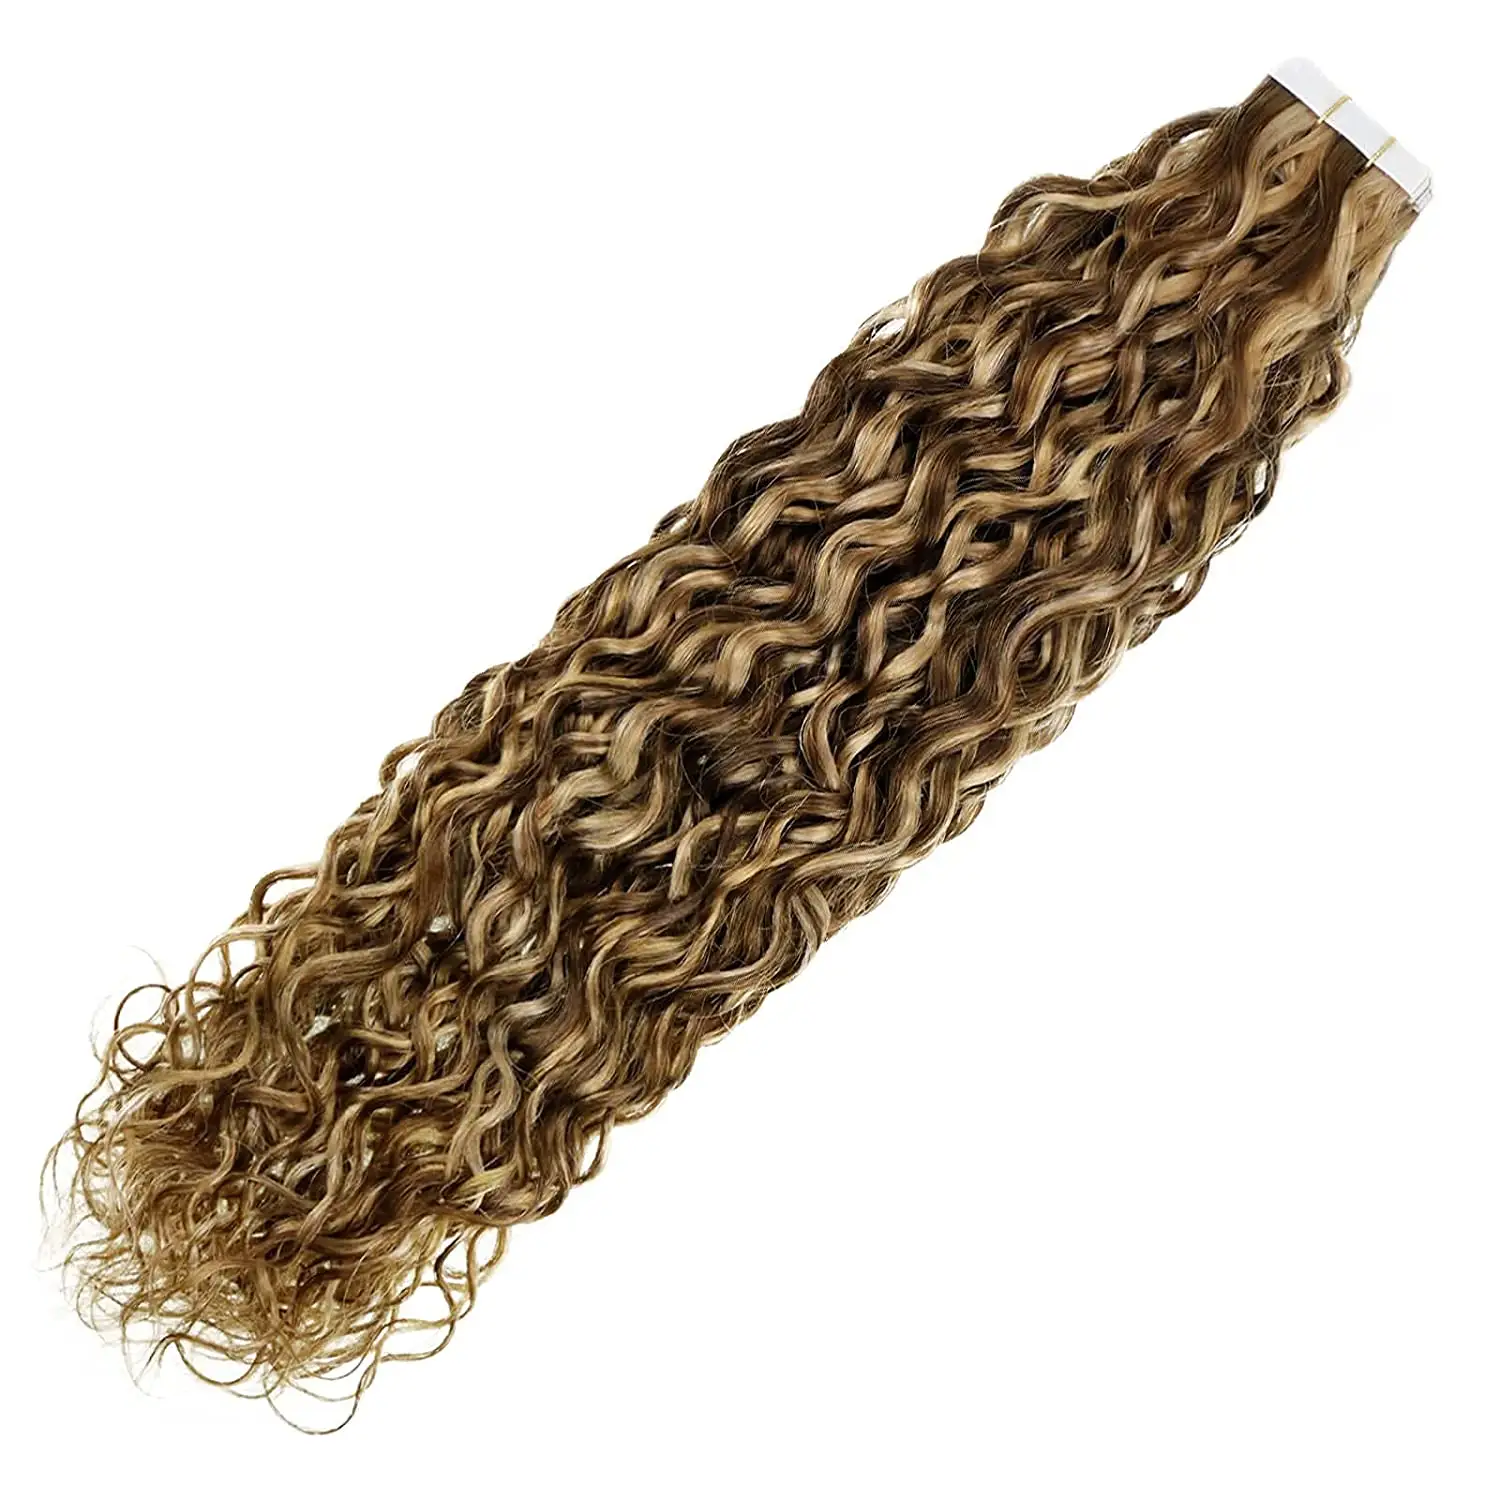 H2D HAIR Curly Tape in Hair Extensions Blonde Human Hair Tape in Extensions Dark Brown Highlight Honey Blonde Color #4/27